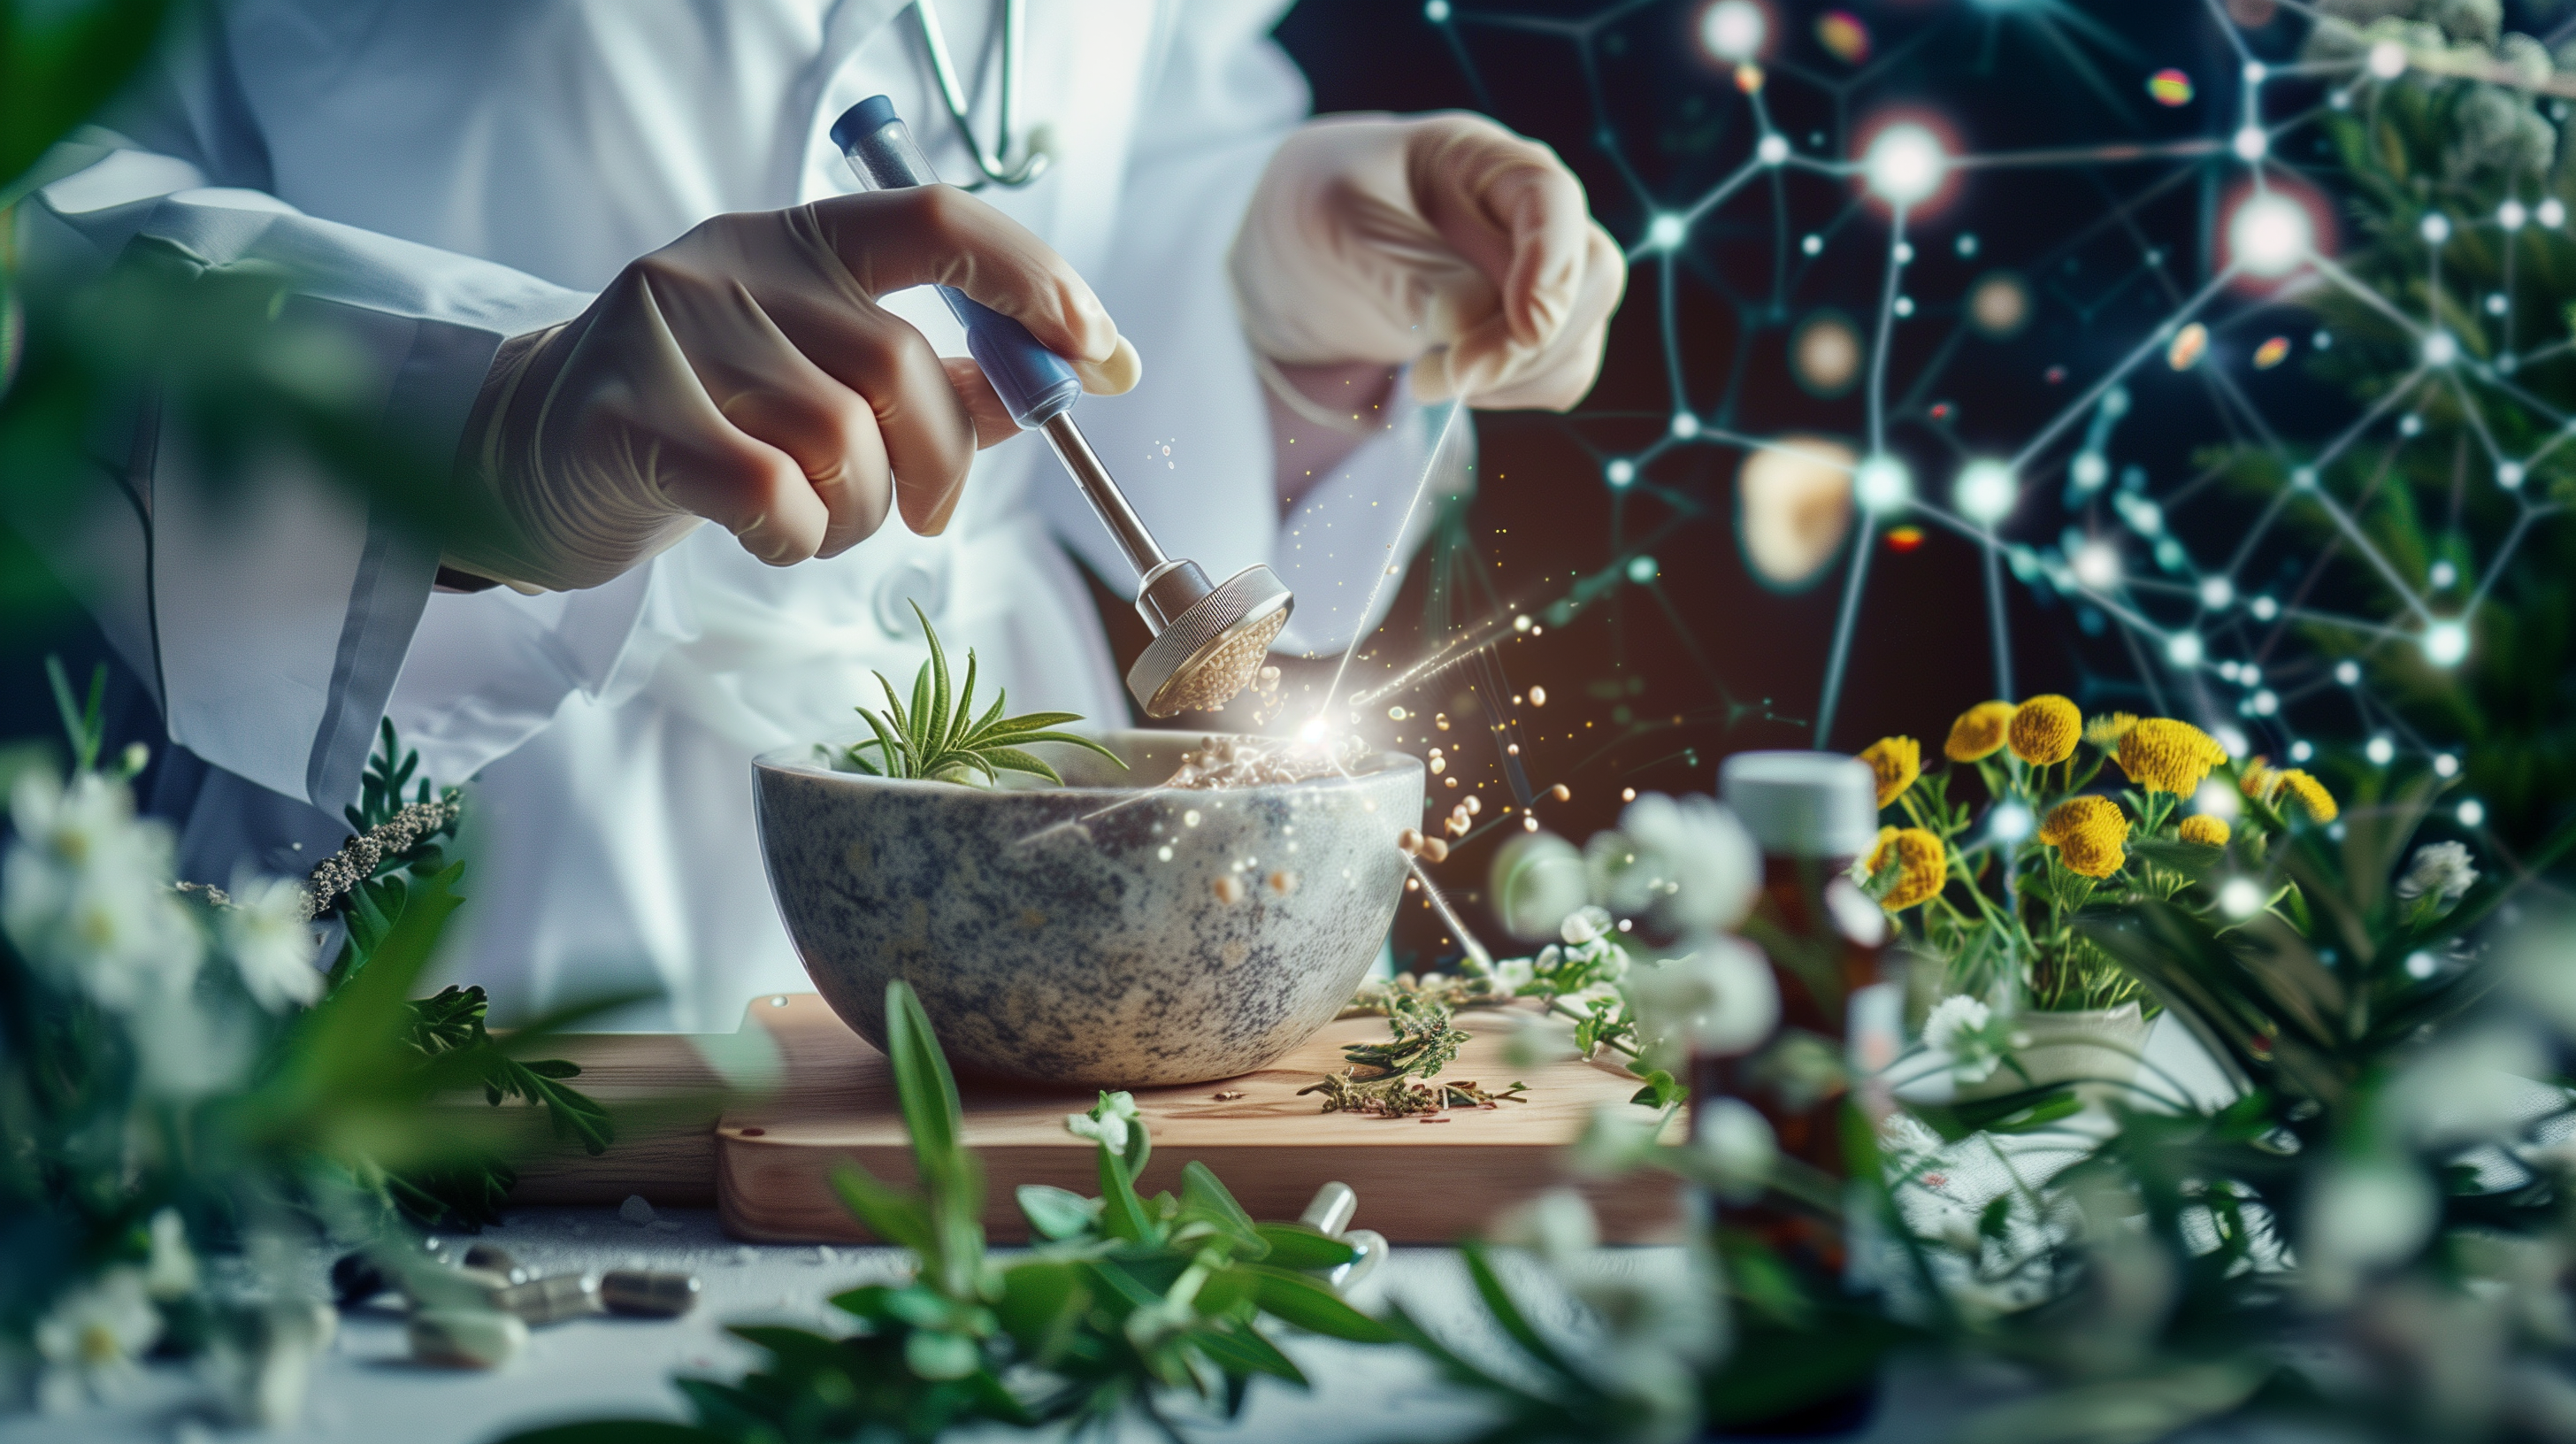 scientist using a mortar and pestle with herbs, surrounded by microcapsules and a magnifying glass